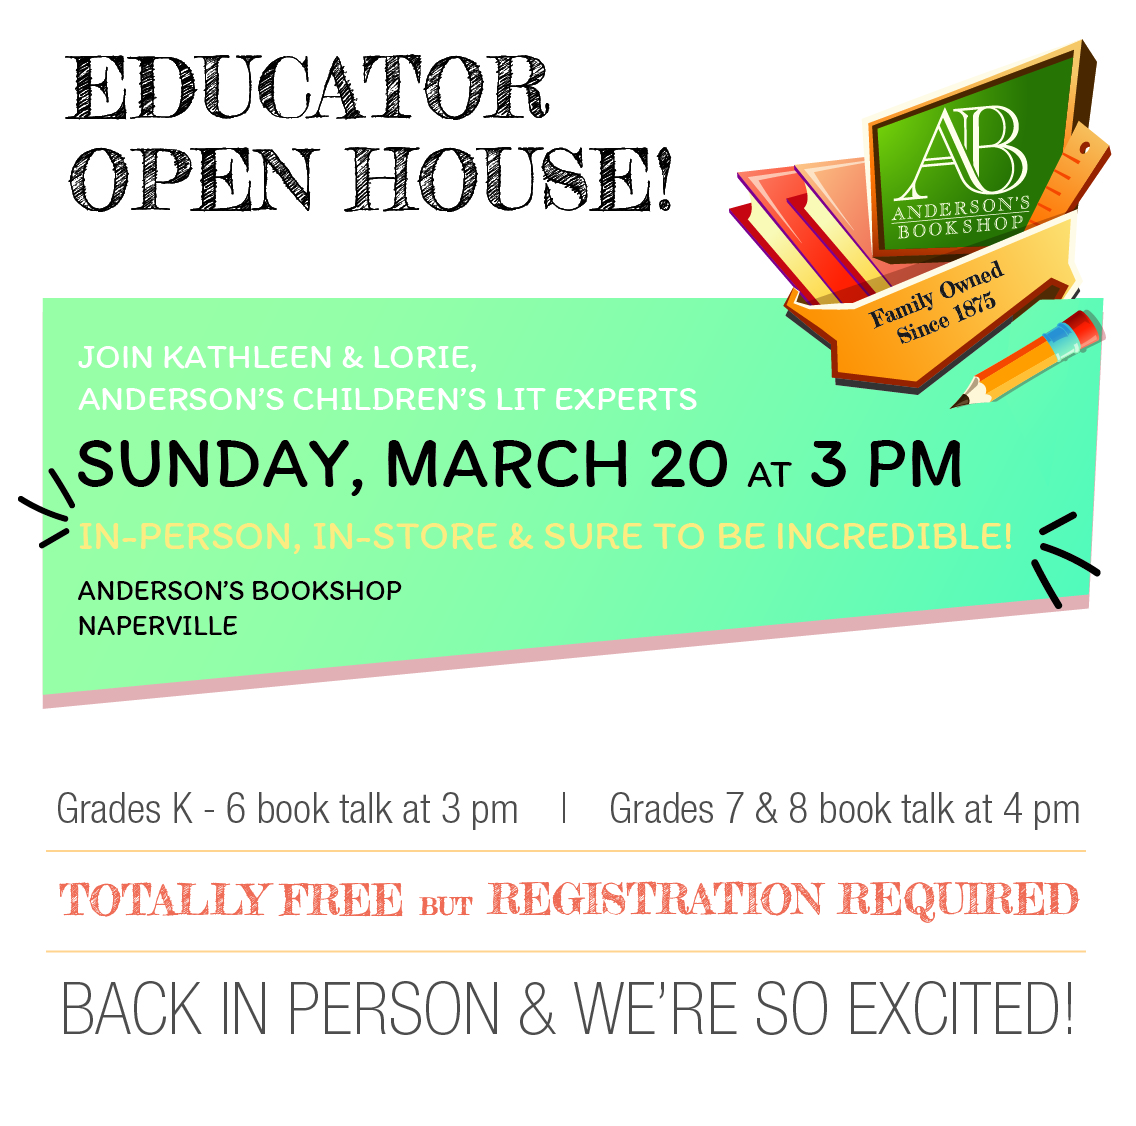 In-Person Educator Open House